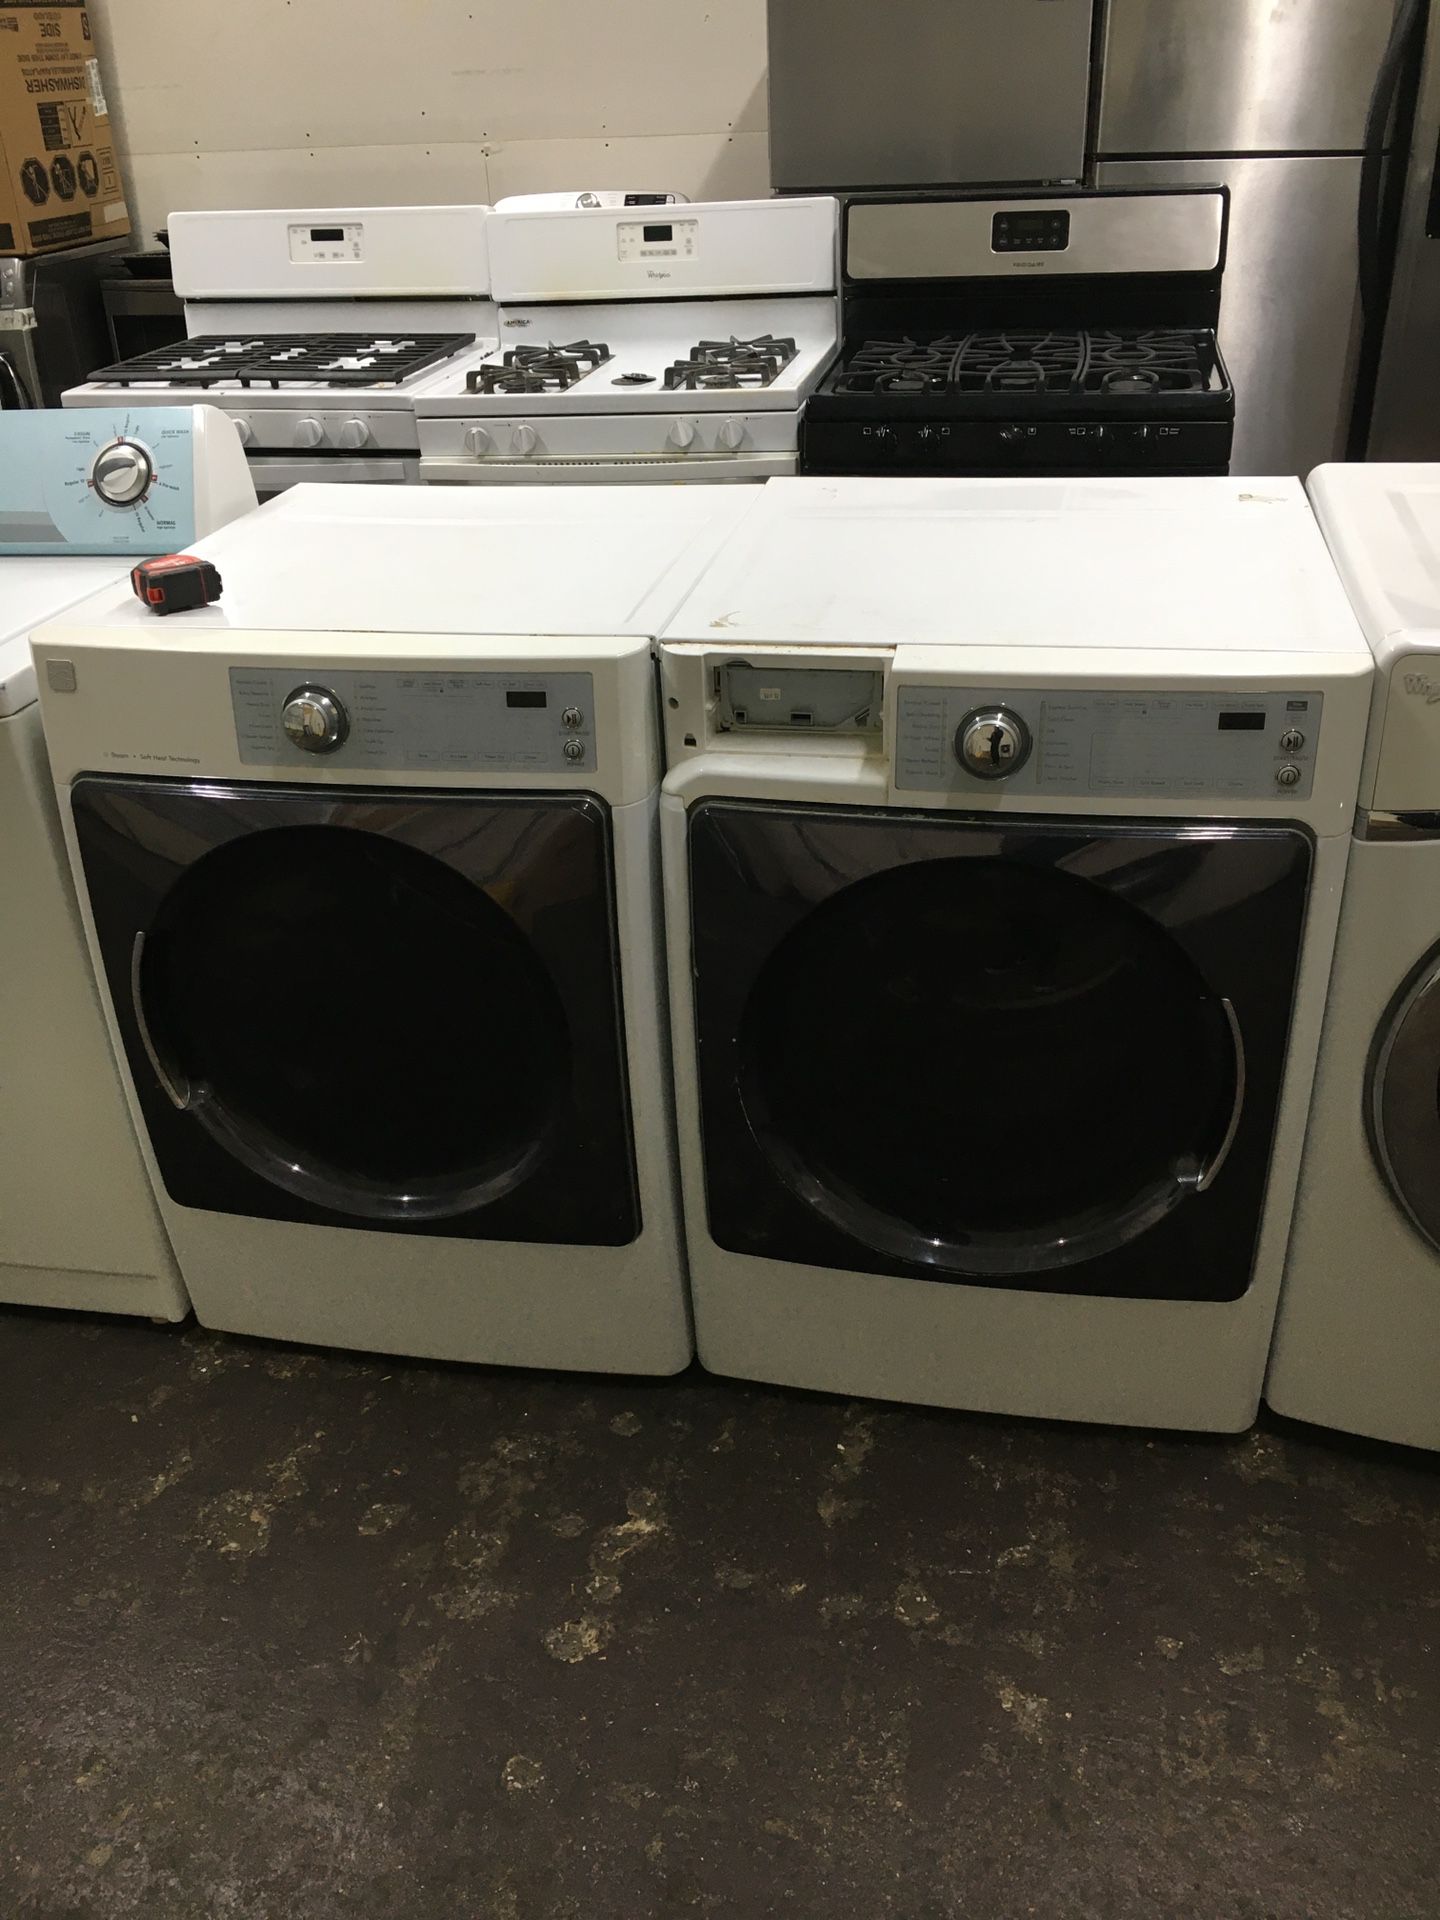 Kenmore Electric Stackable Washer & Dryer